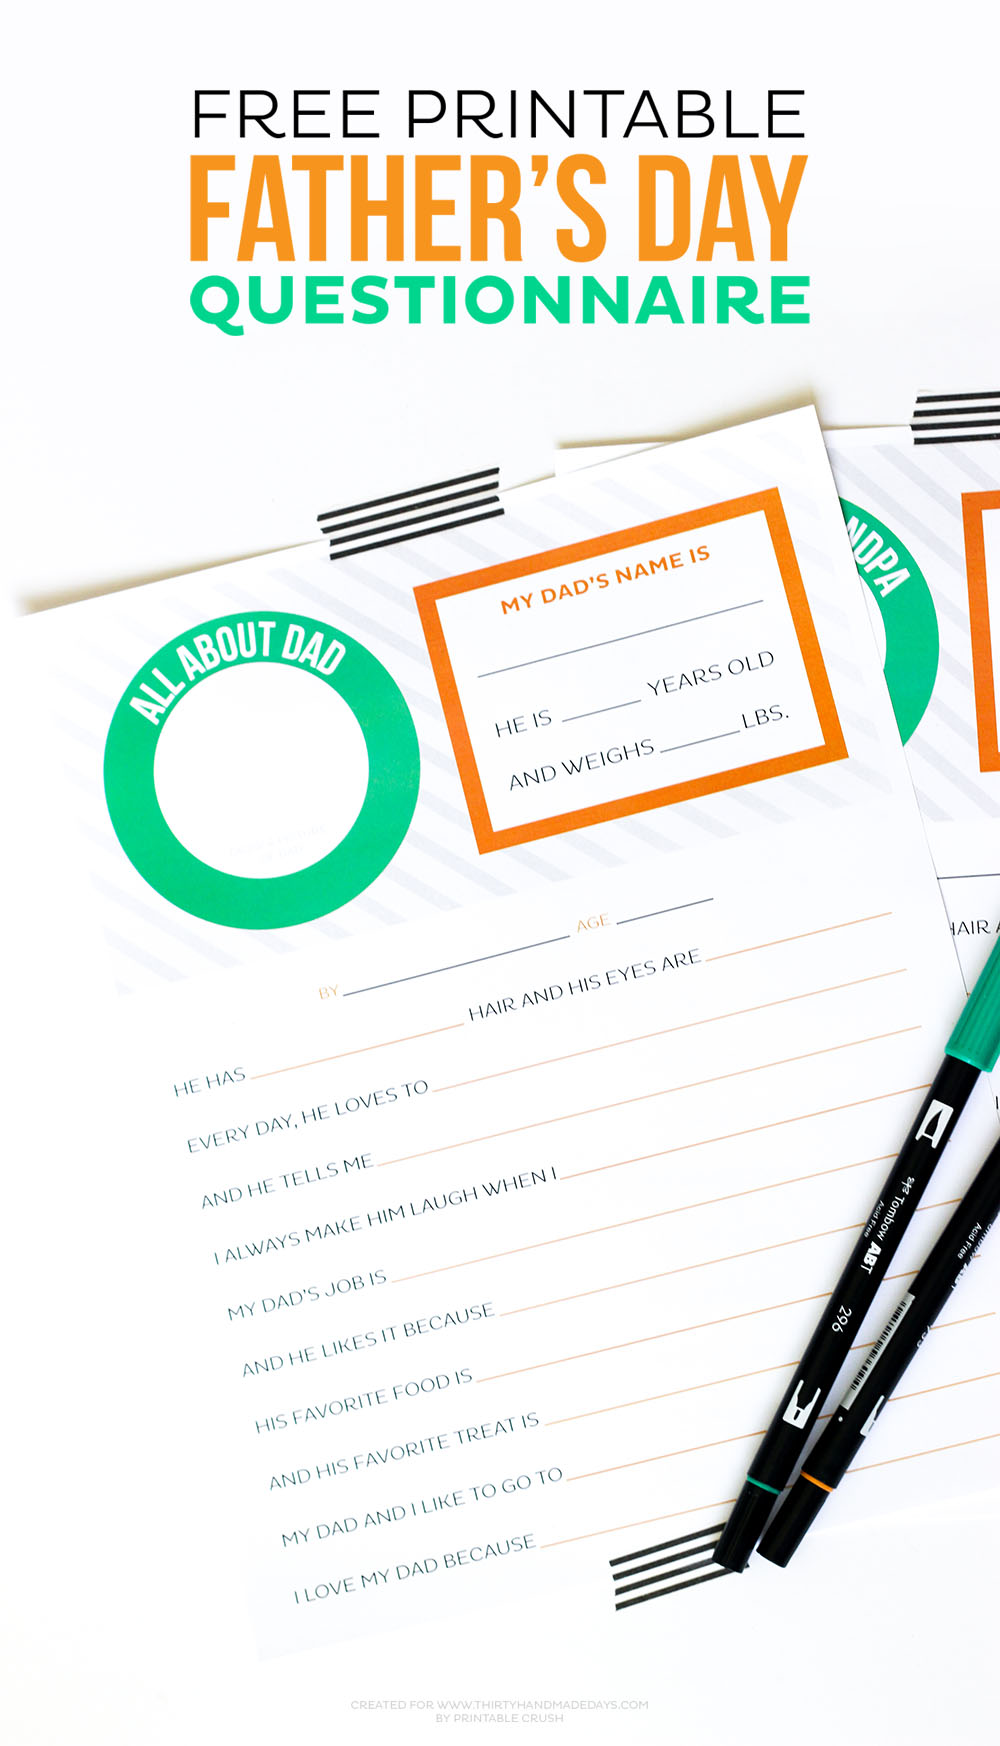 Give Dad or Grandpa a good laugh with a FREE Printable Father's Day Questionnaire! The kids will love filling it out and dad will love reading it.